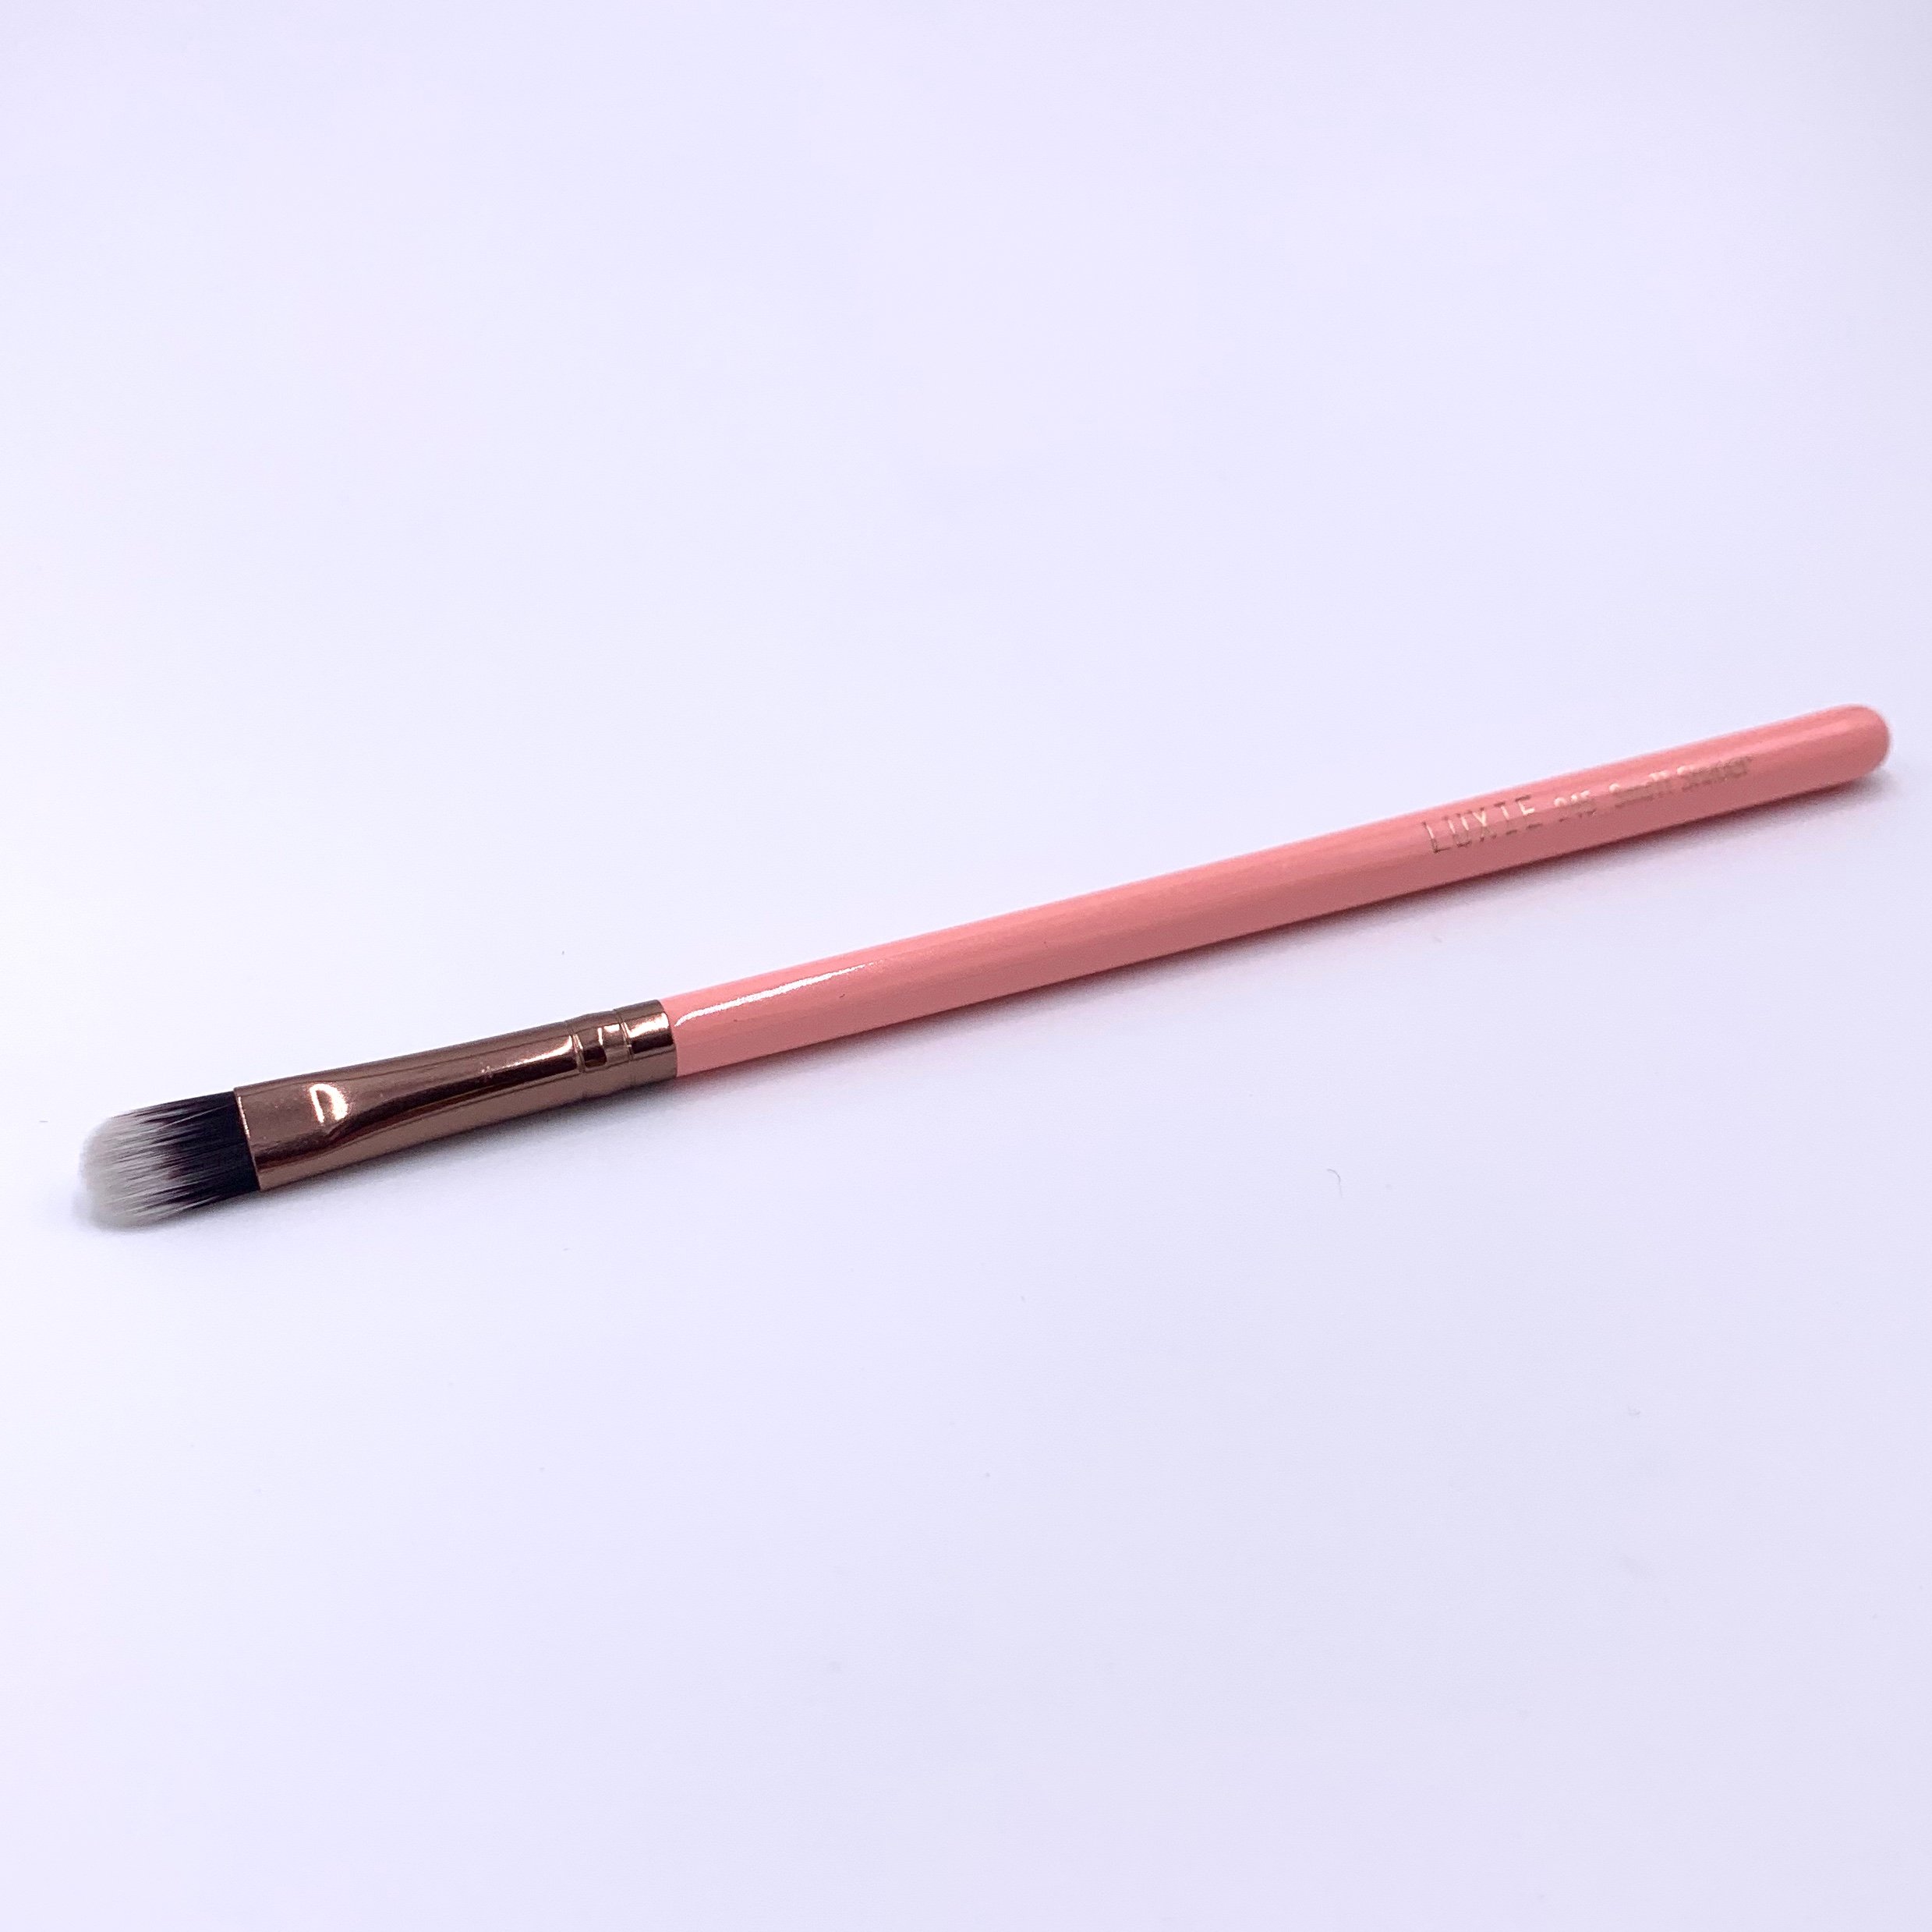 Luxie Beauty 245 Small Shader Brush for BirchBox July 2020